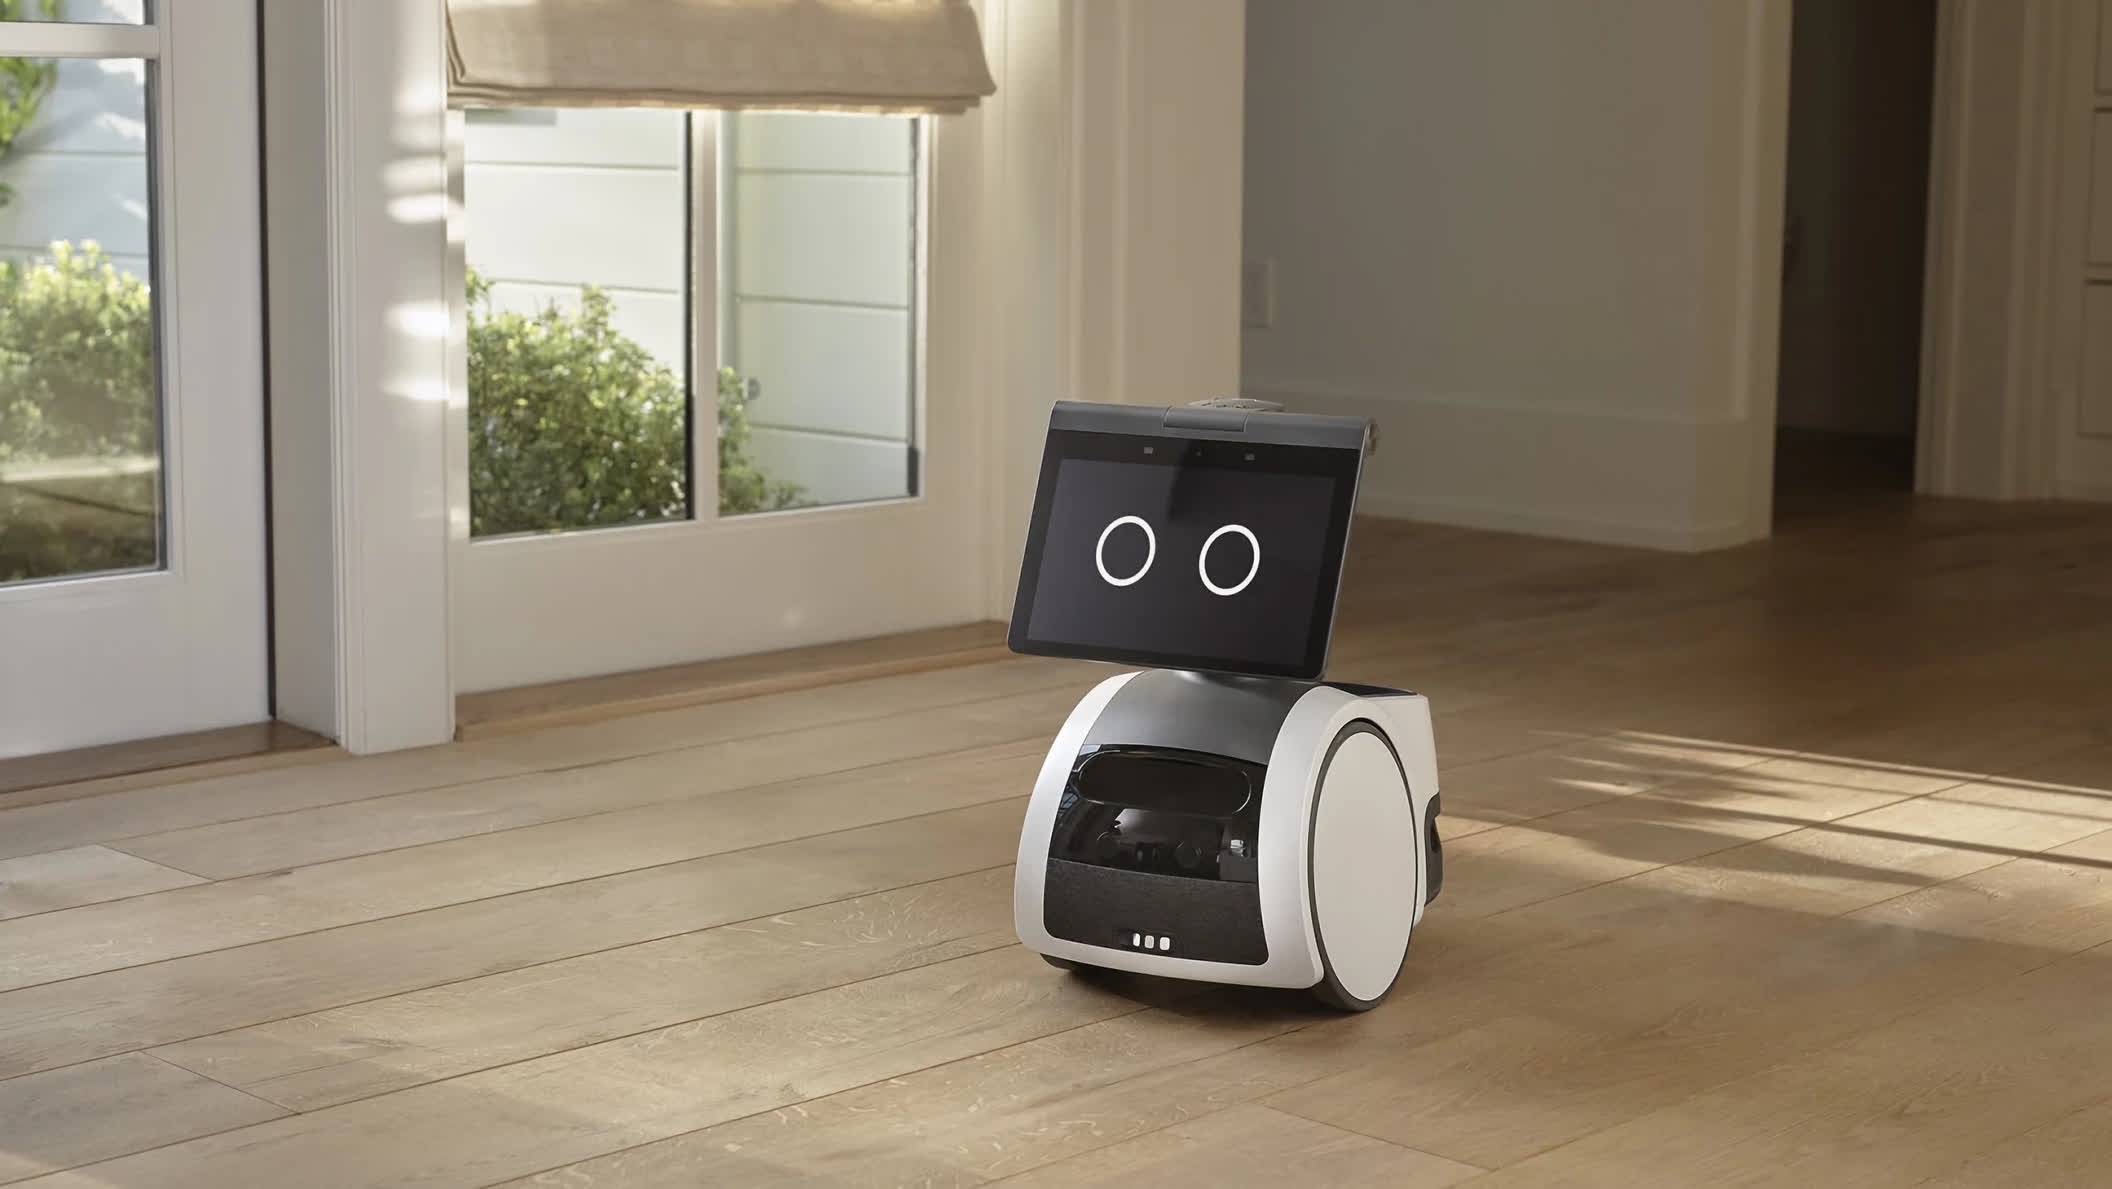 Amazon Astro developers claim the robot is a disaster that's not ready for release